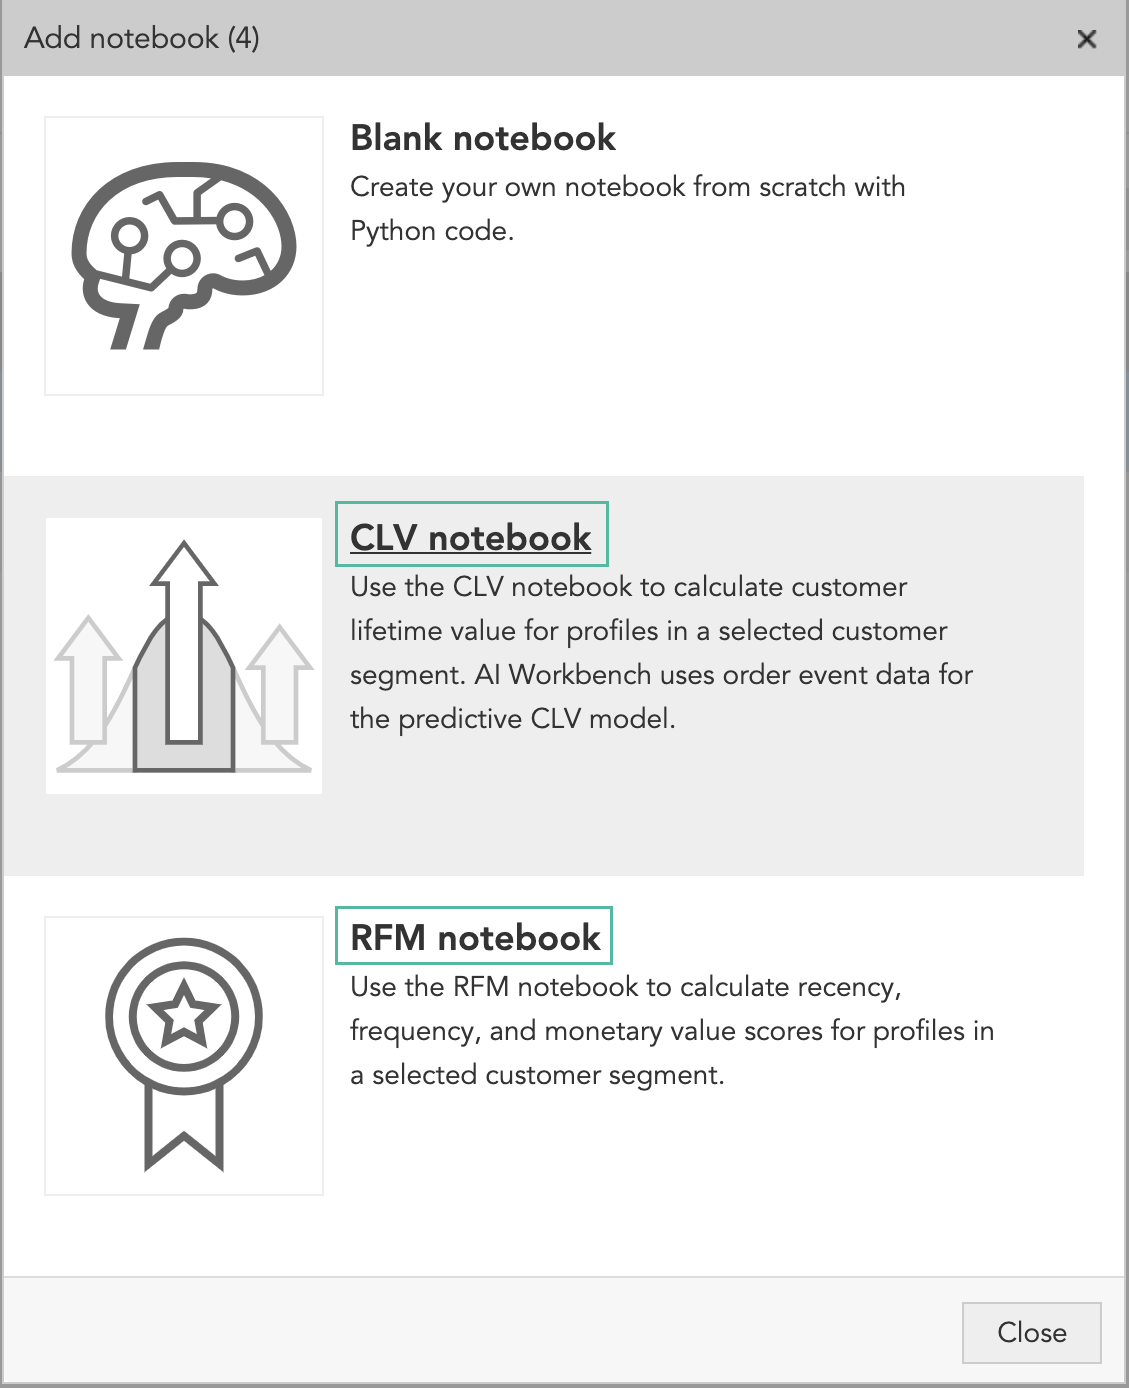 How to use AI marketing and AI machine learning to calculate CLV and RFM marketing models for customer segments in BlueConic CDP's AI Workbench